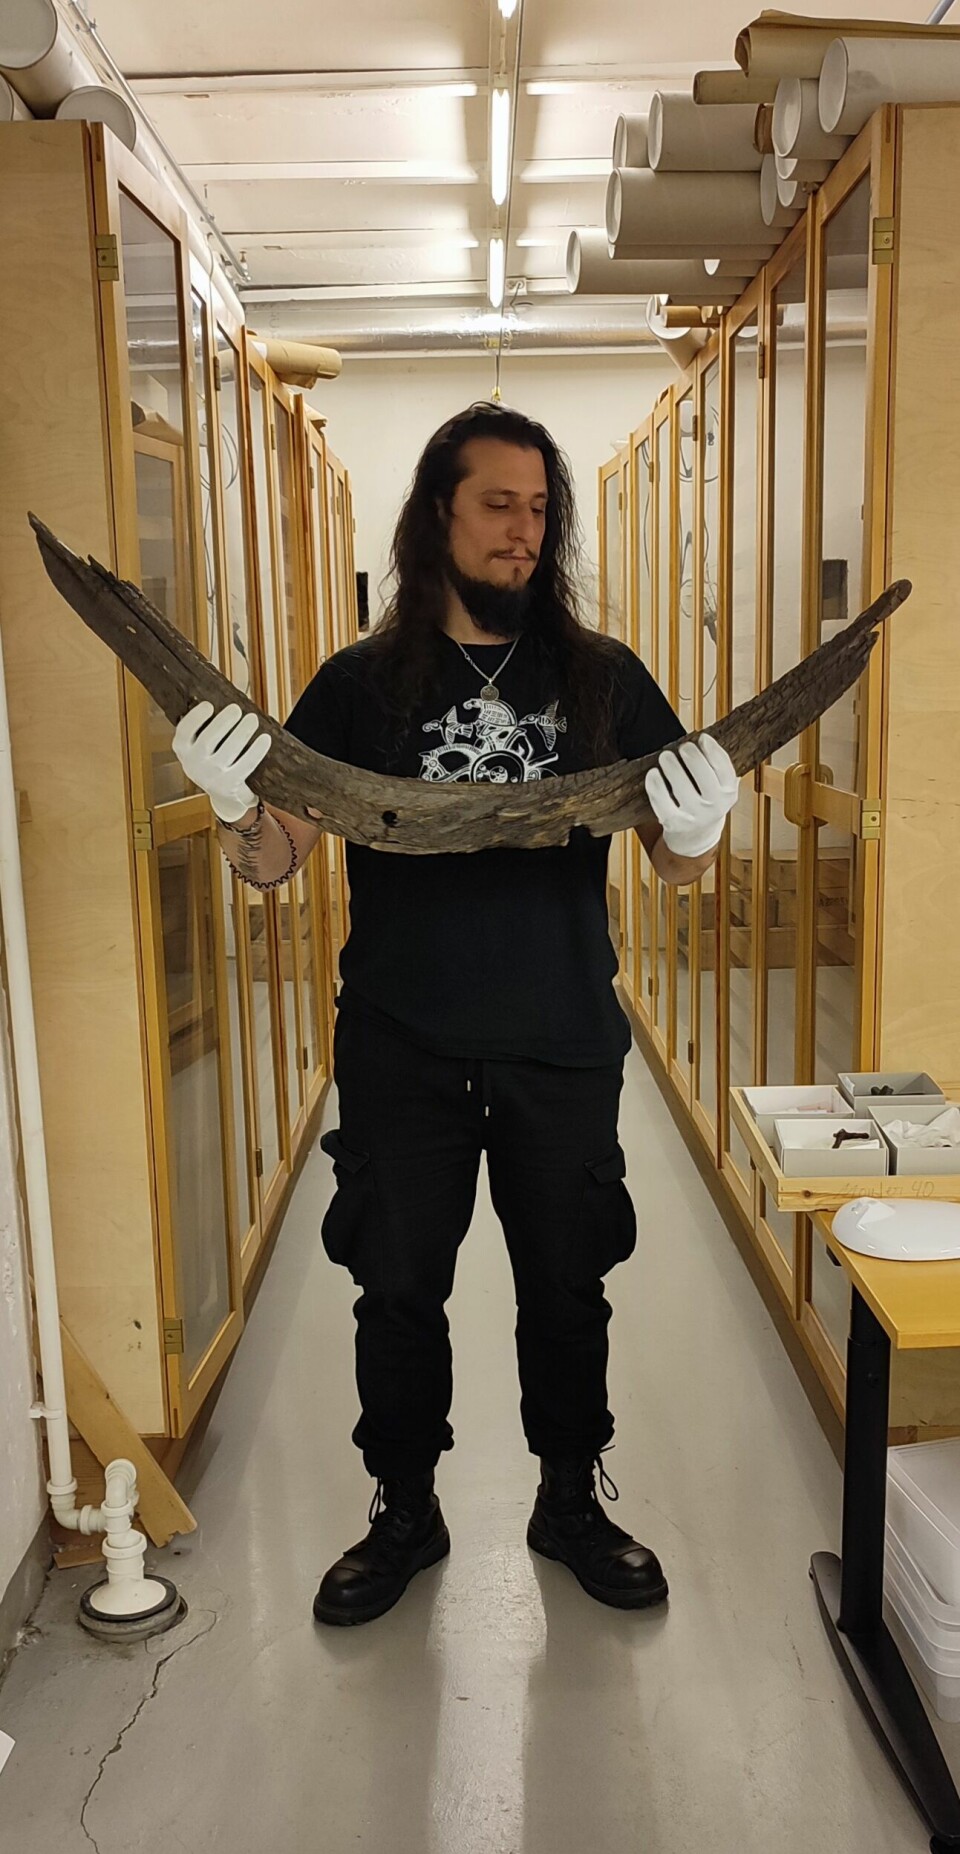 Massimiliano Ditta holds up a part of the Storhaug ship which was found in 1974.